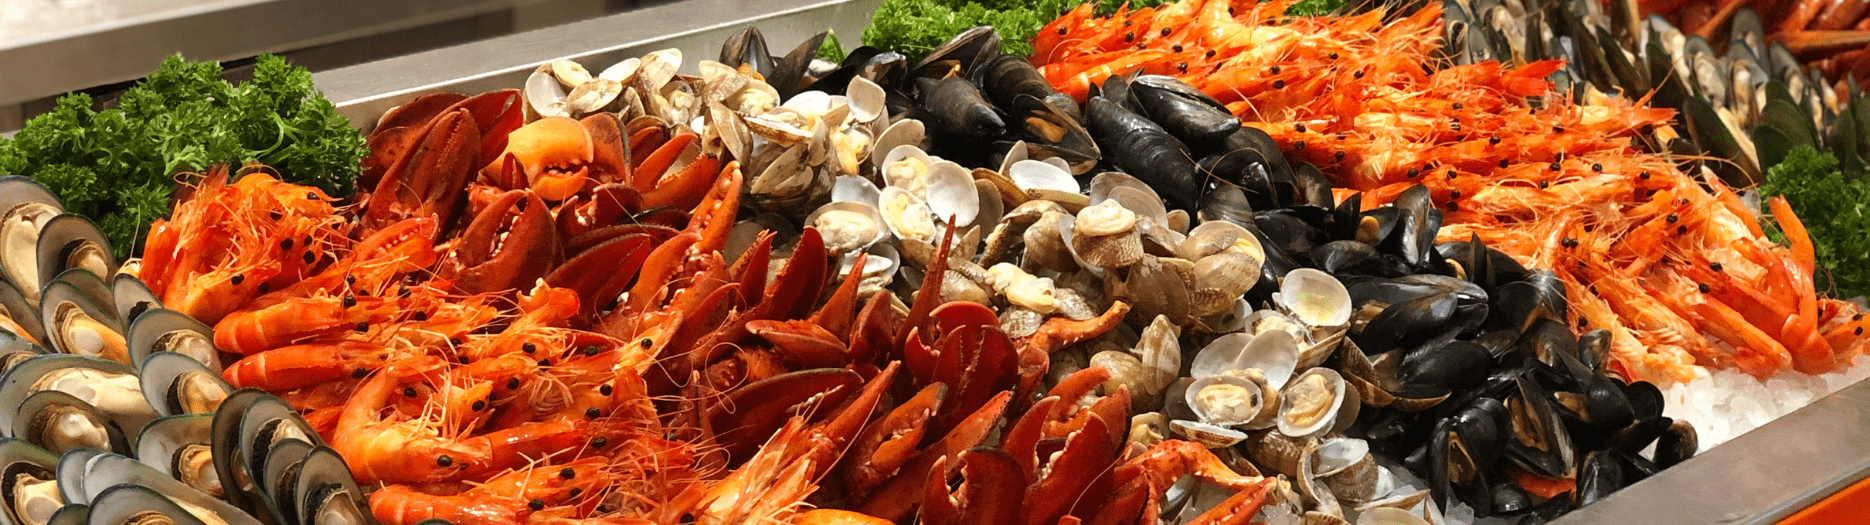 SAFRA - Carousel Seafood Counter - 1870x525 px-min